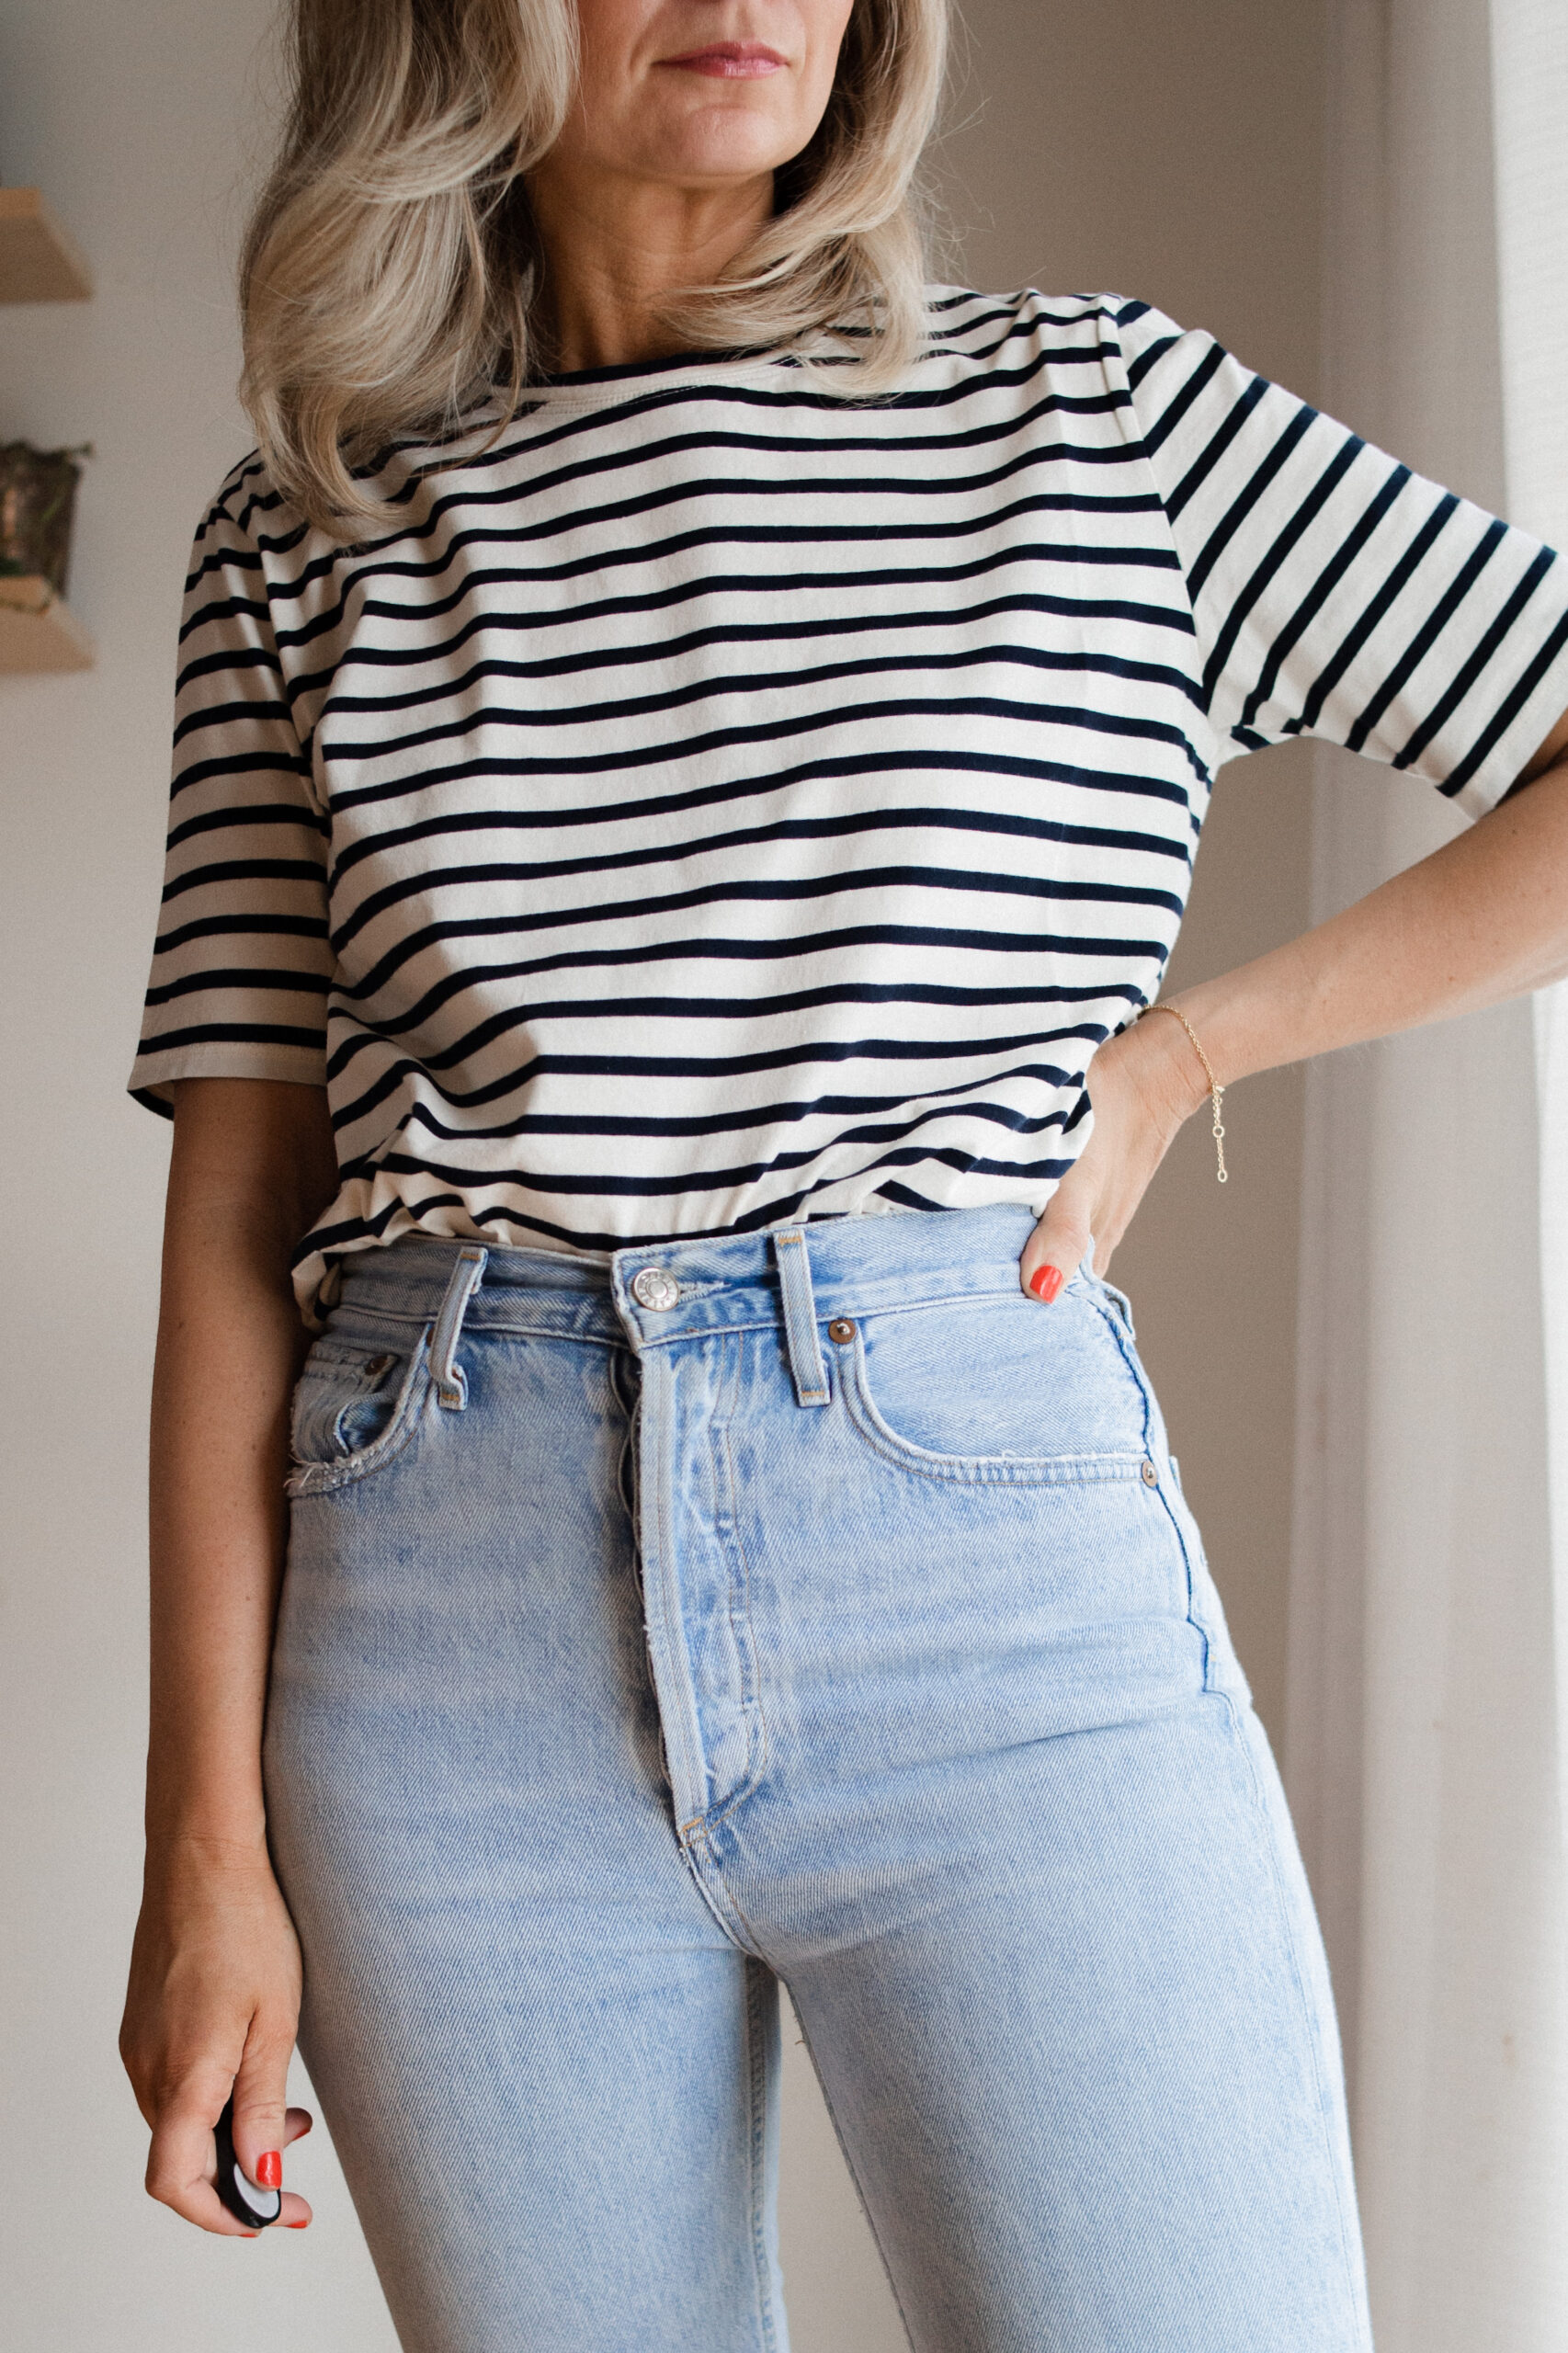 Karin Emily wears a pair of AGOLDE riley jeans with a striped tee and brown sandals for her AGOLDE denim guide